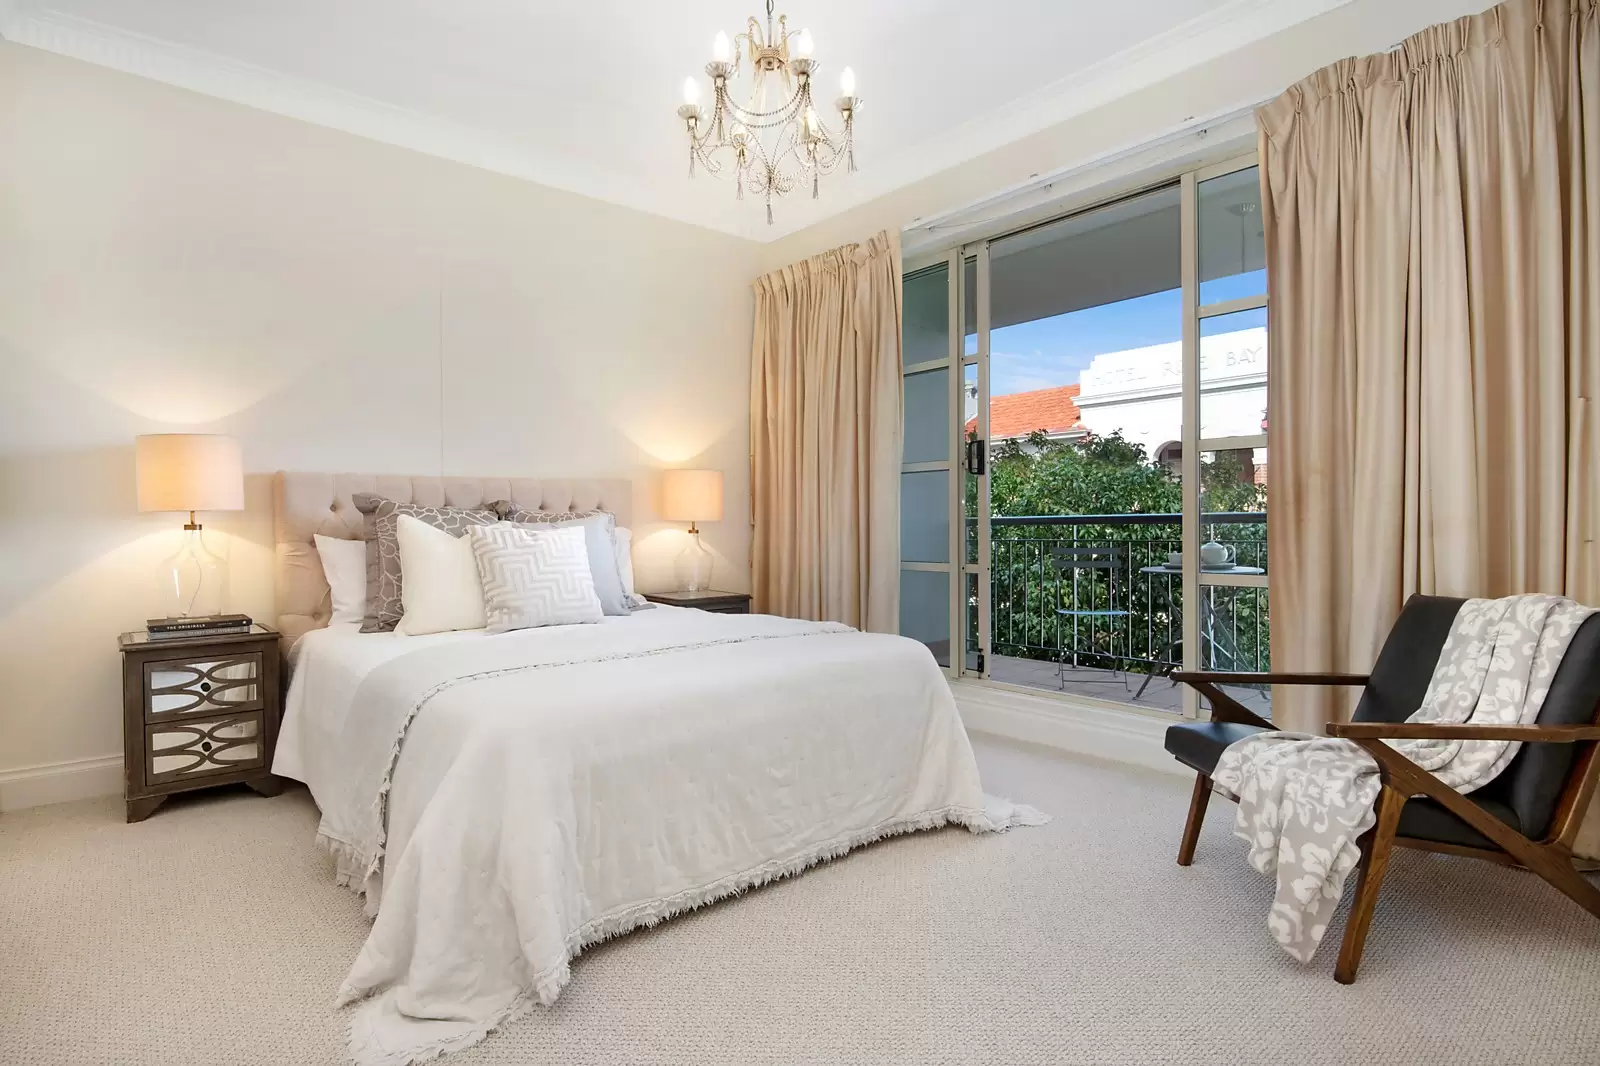 Photo #6: 15/809 New South Head Road, Rose Bay - Sold by Sydney Sotheby's International Realty